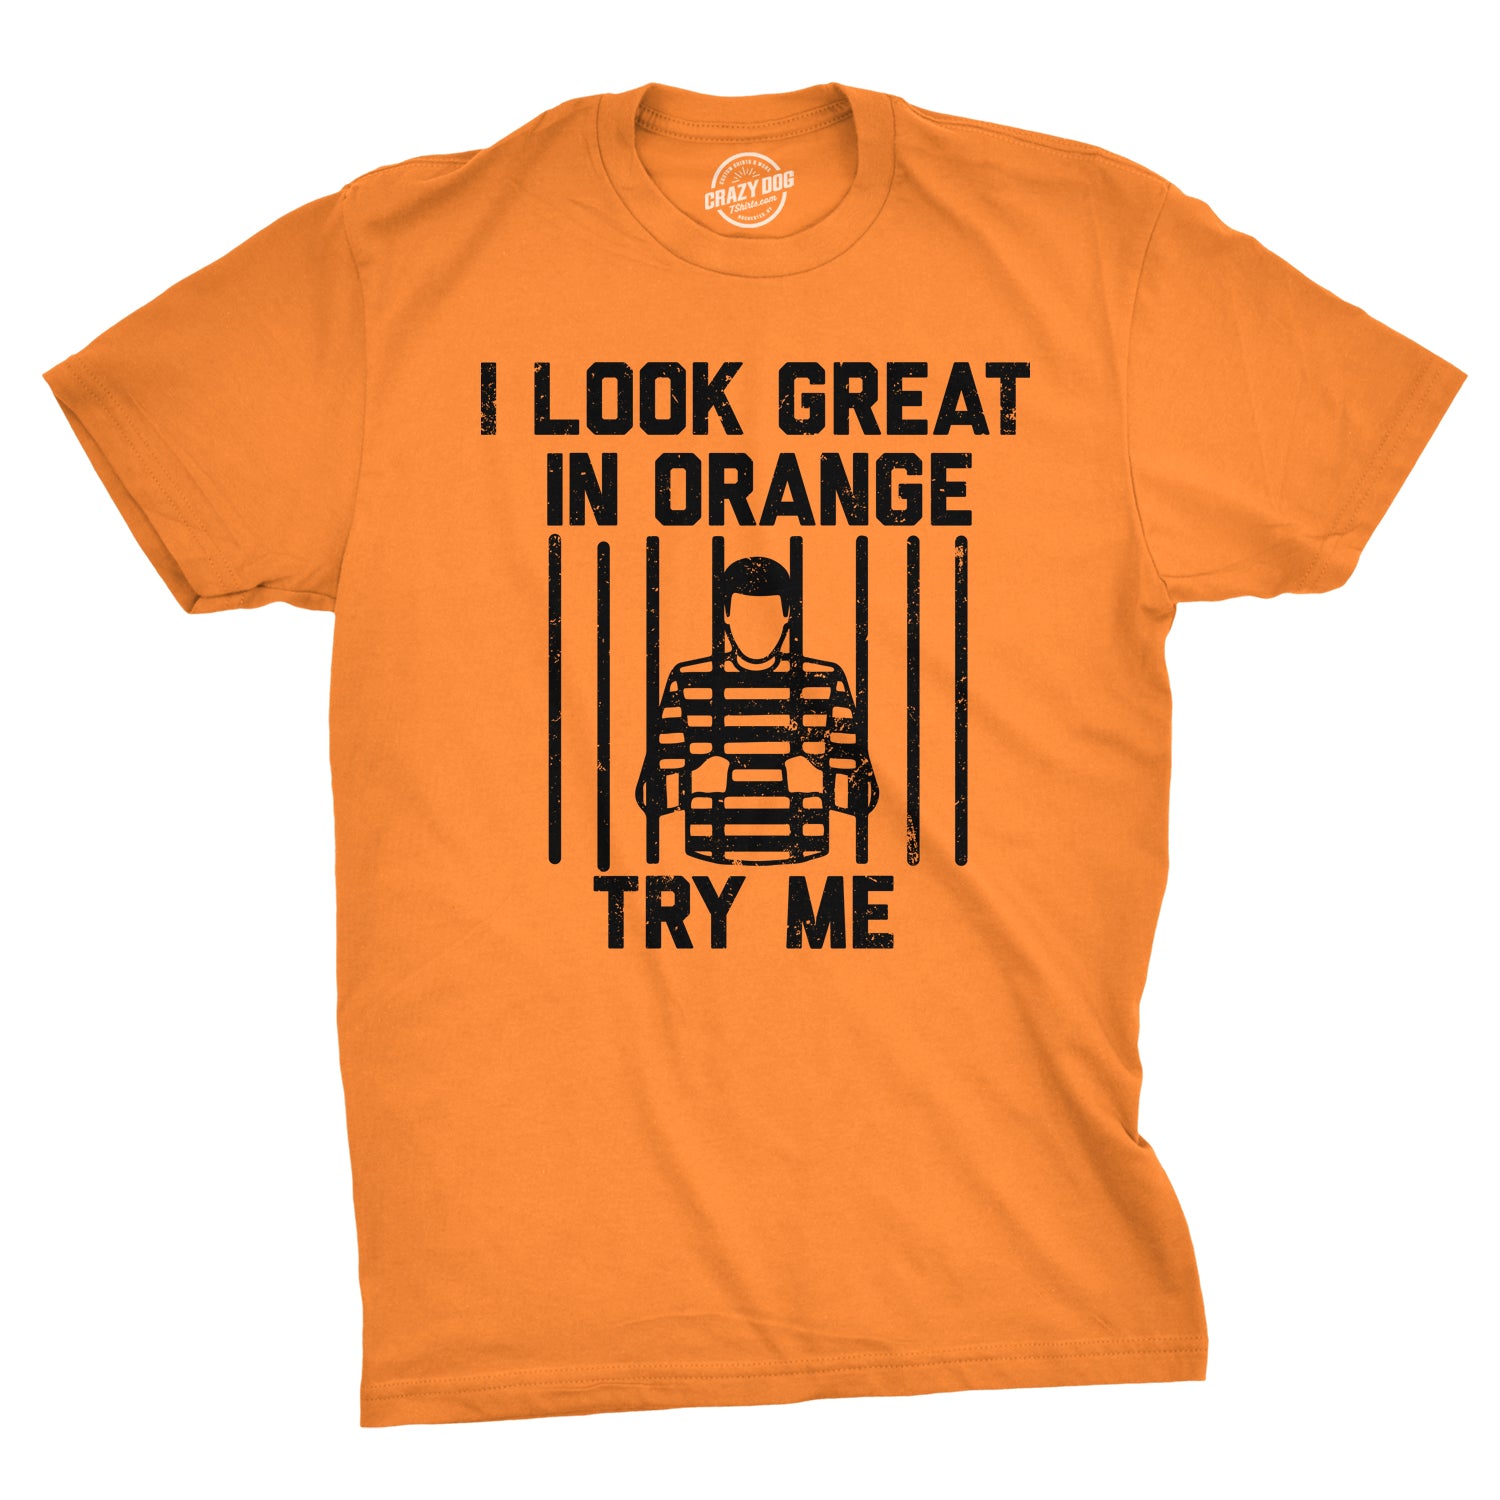 Funny Orange - TRYME I Look Great In Orange Try Me Mens T Shirt Nerdy sarcastic Tee